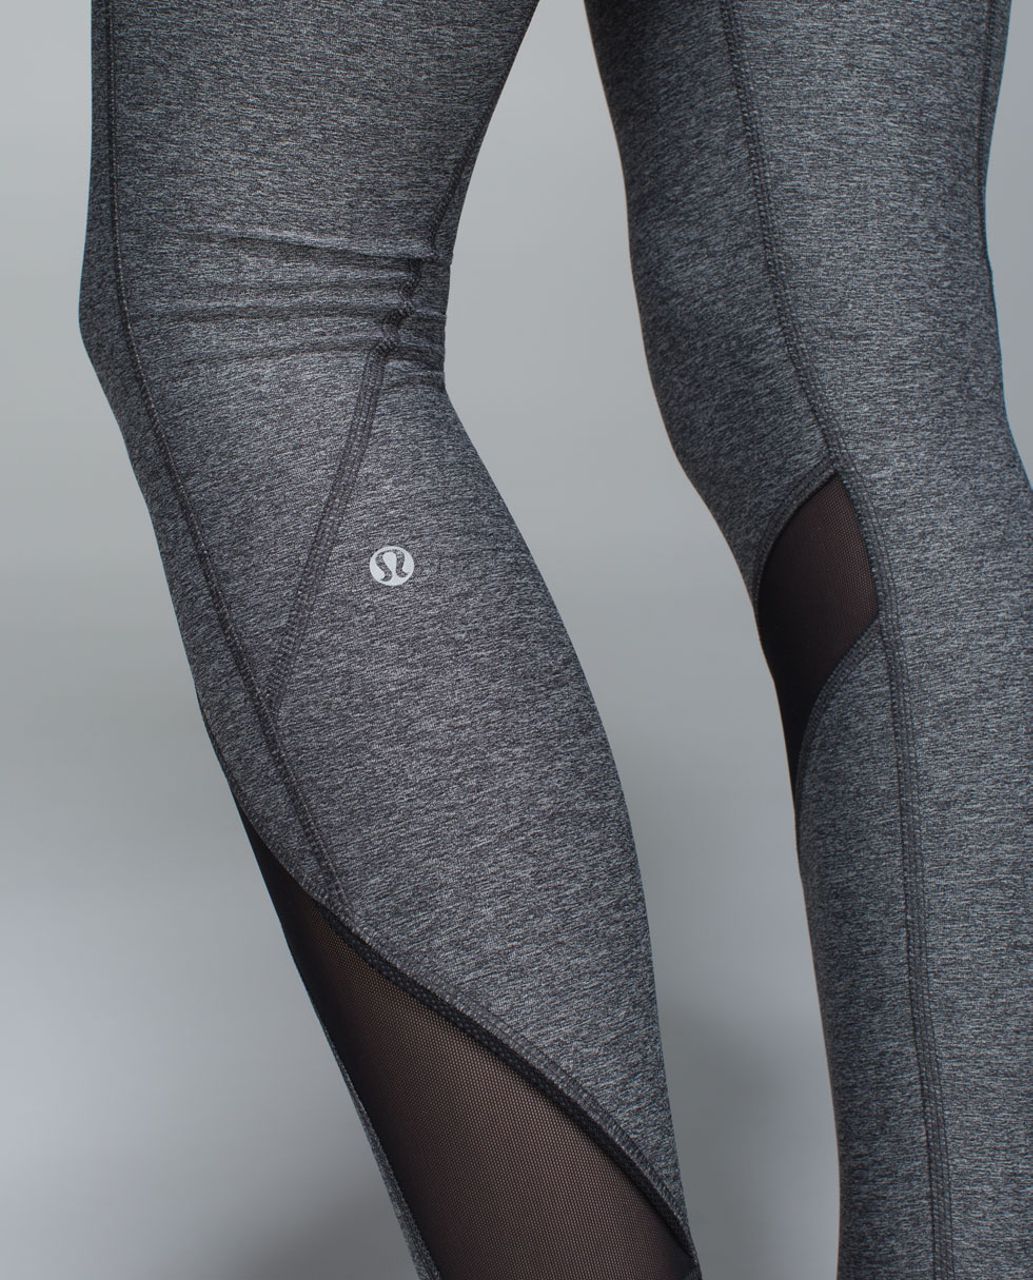 Lululemon Align leggings review: Are they worth it? - Reviewed